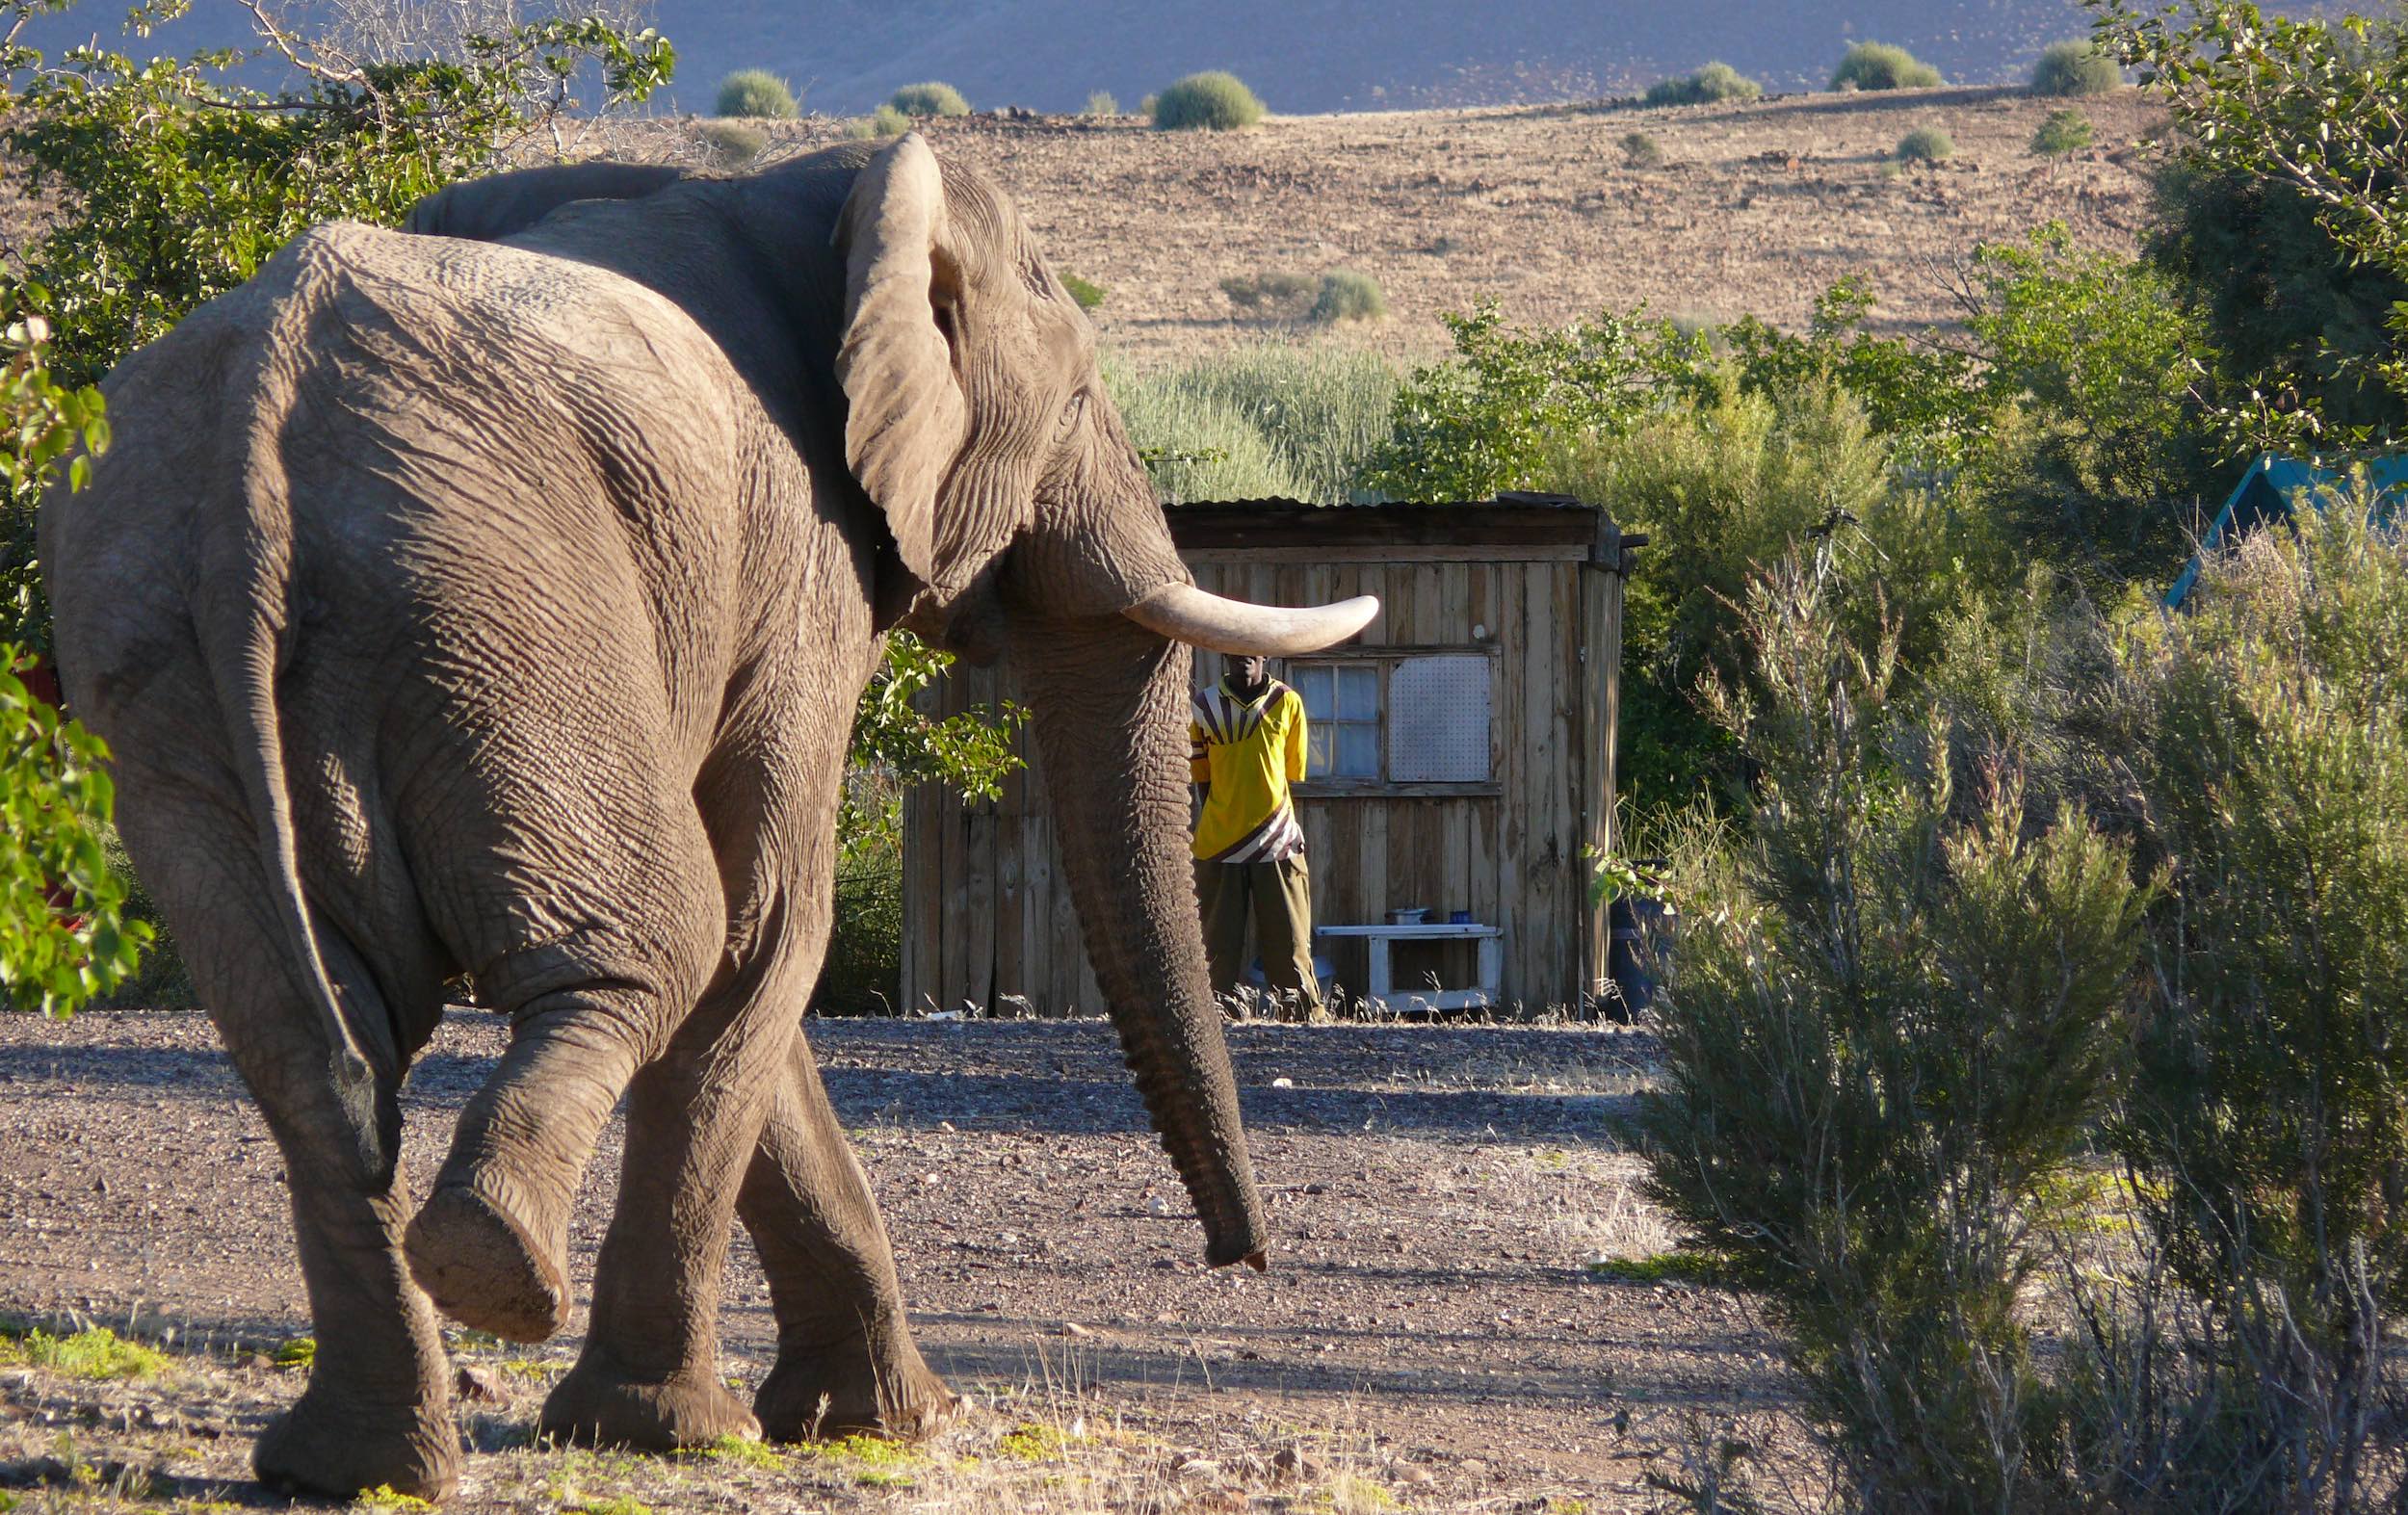 A large elephant approaches a man standing in front of a small wooden shack.